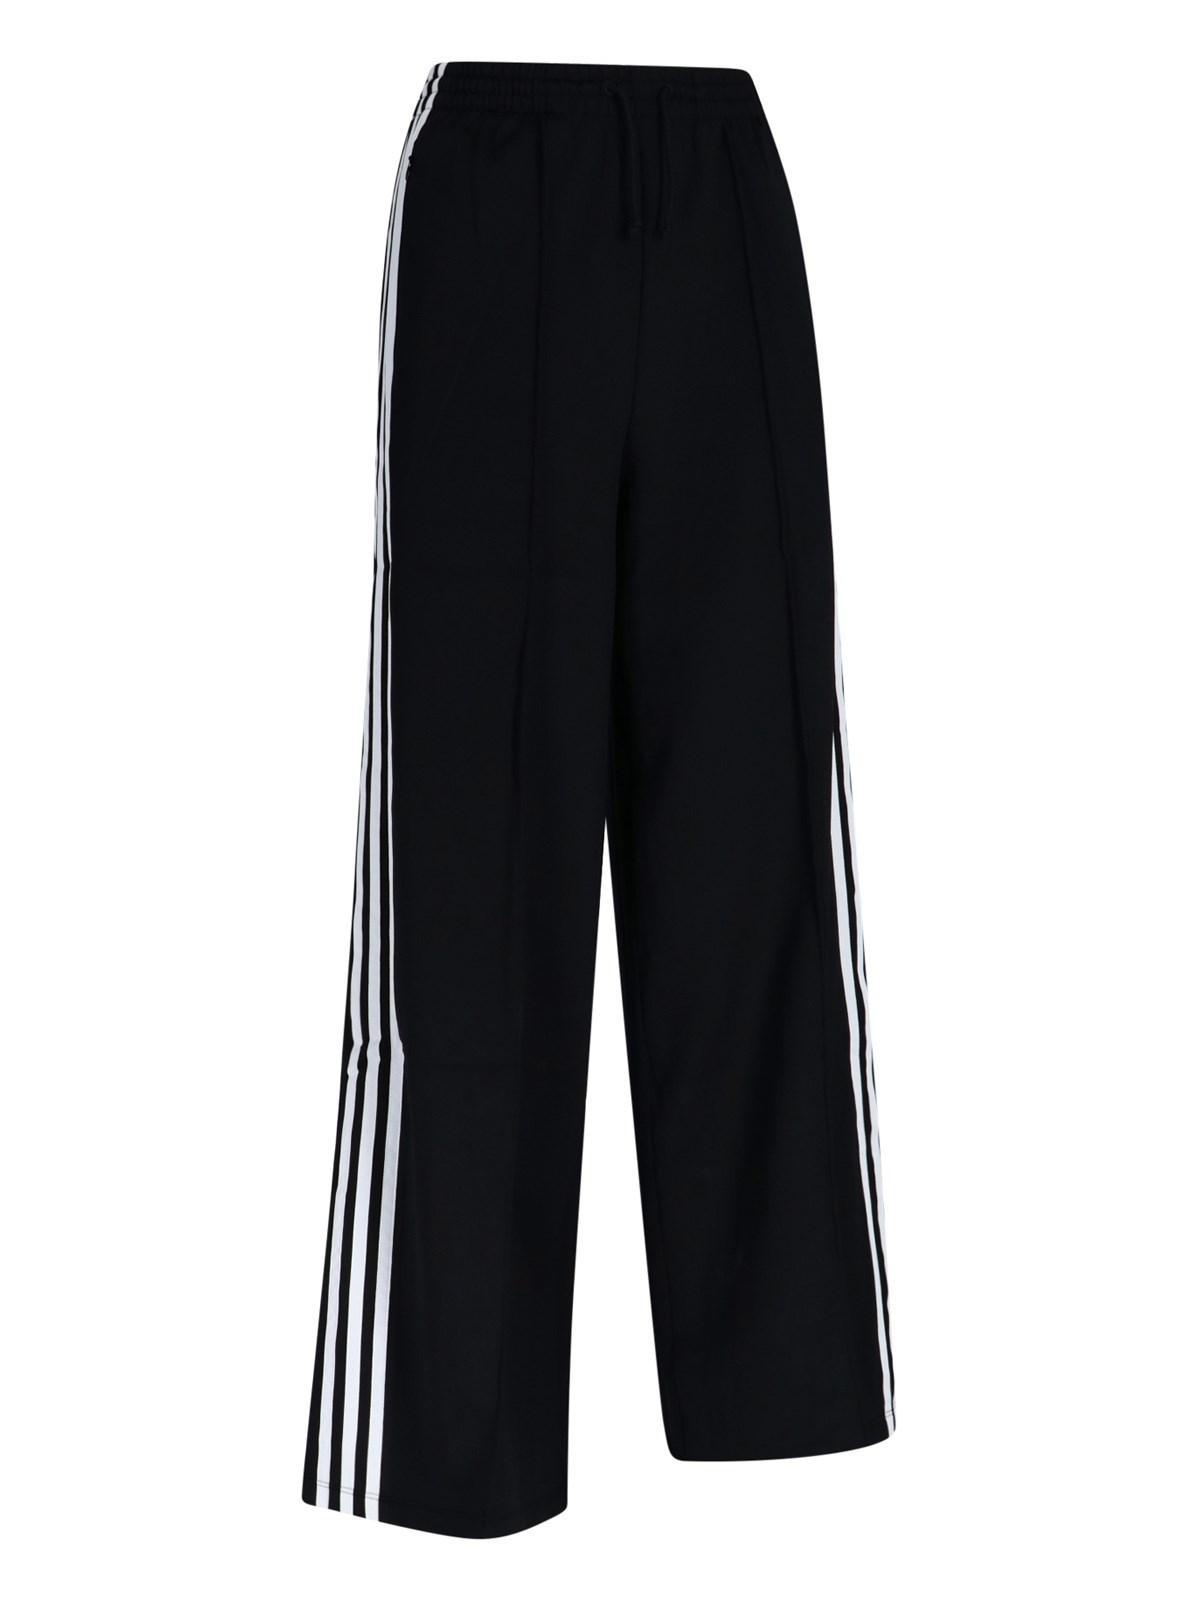 adidas 'relaxed Wide Leg' Sports Pants in Black | Lyst